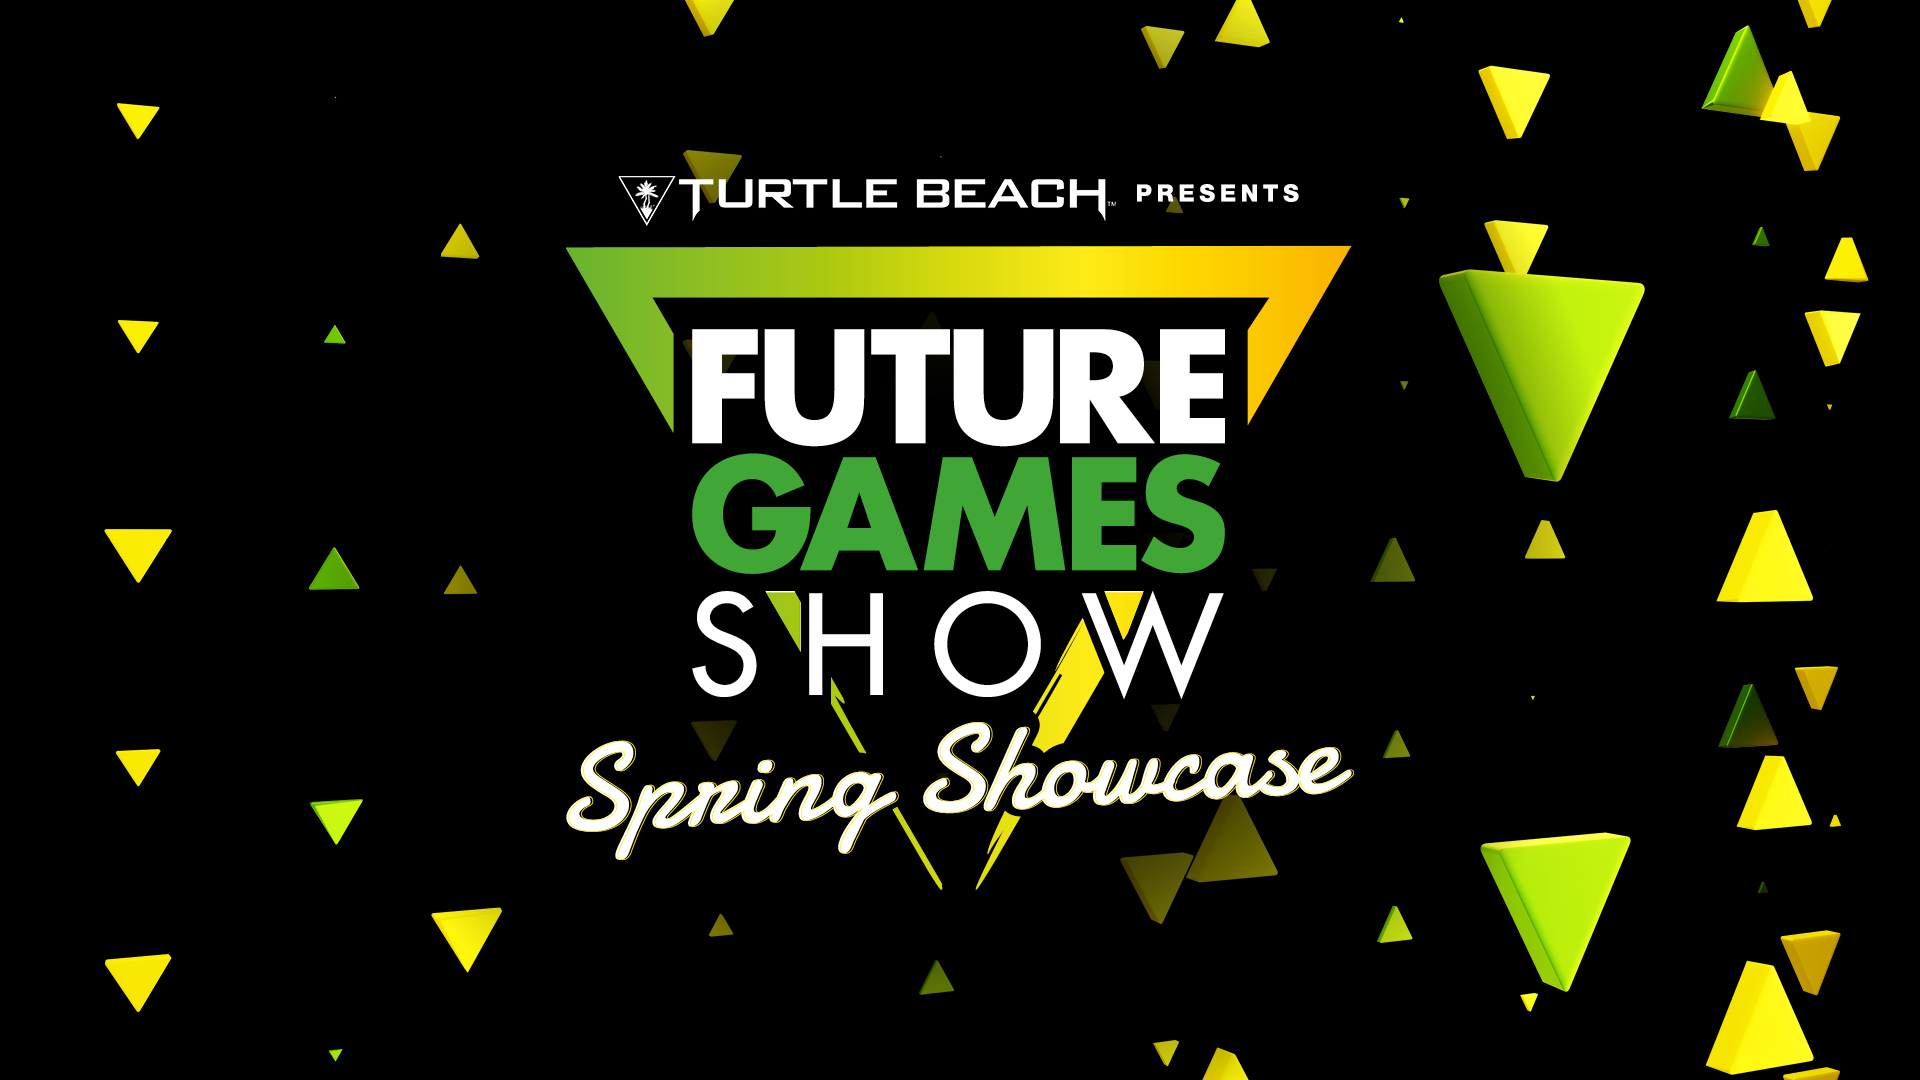 The Future Games Show returns March 23, featuring over 50 games